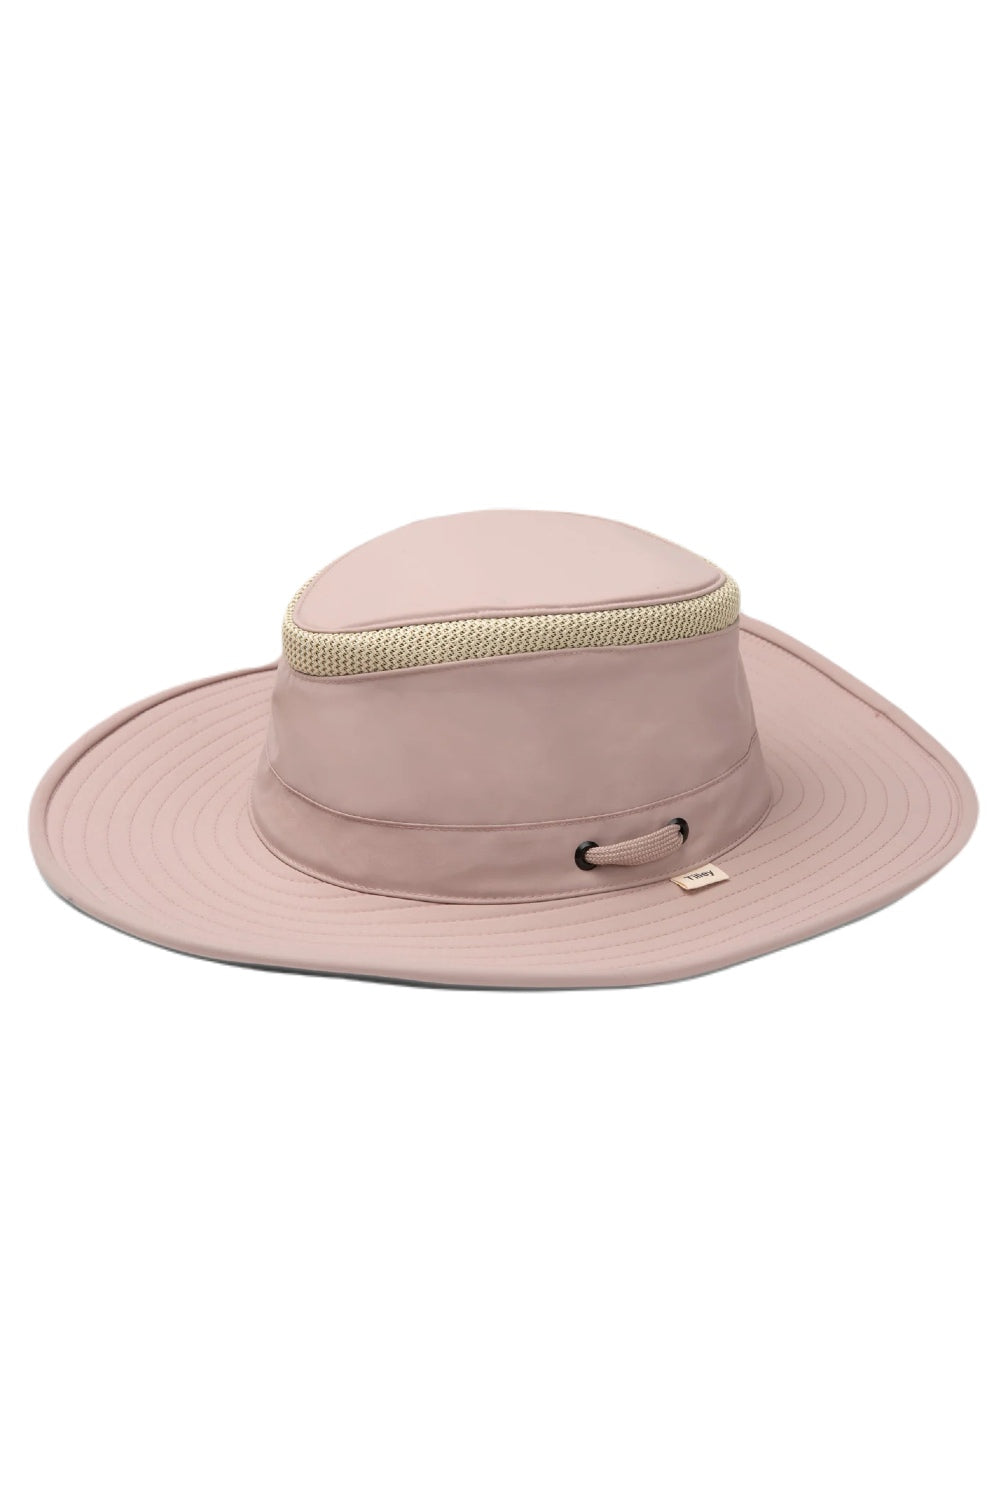 Tilley Hats Airflo Broad Brim Recycled Hat In Soft Mauve 